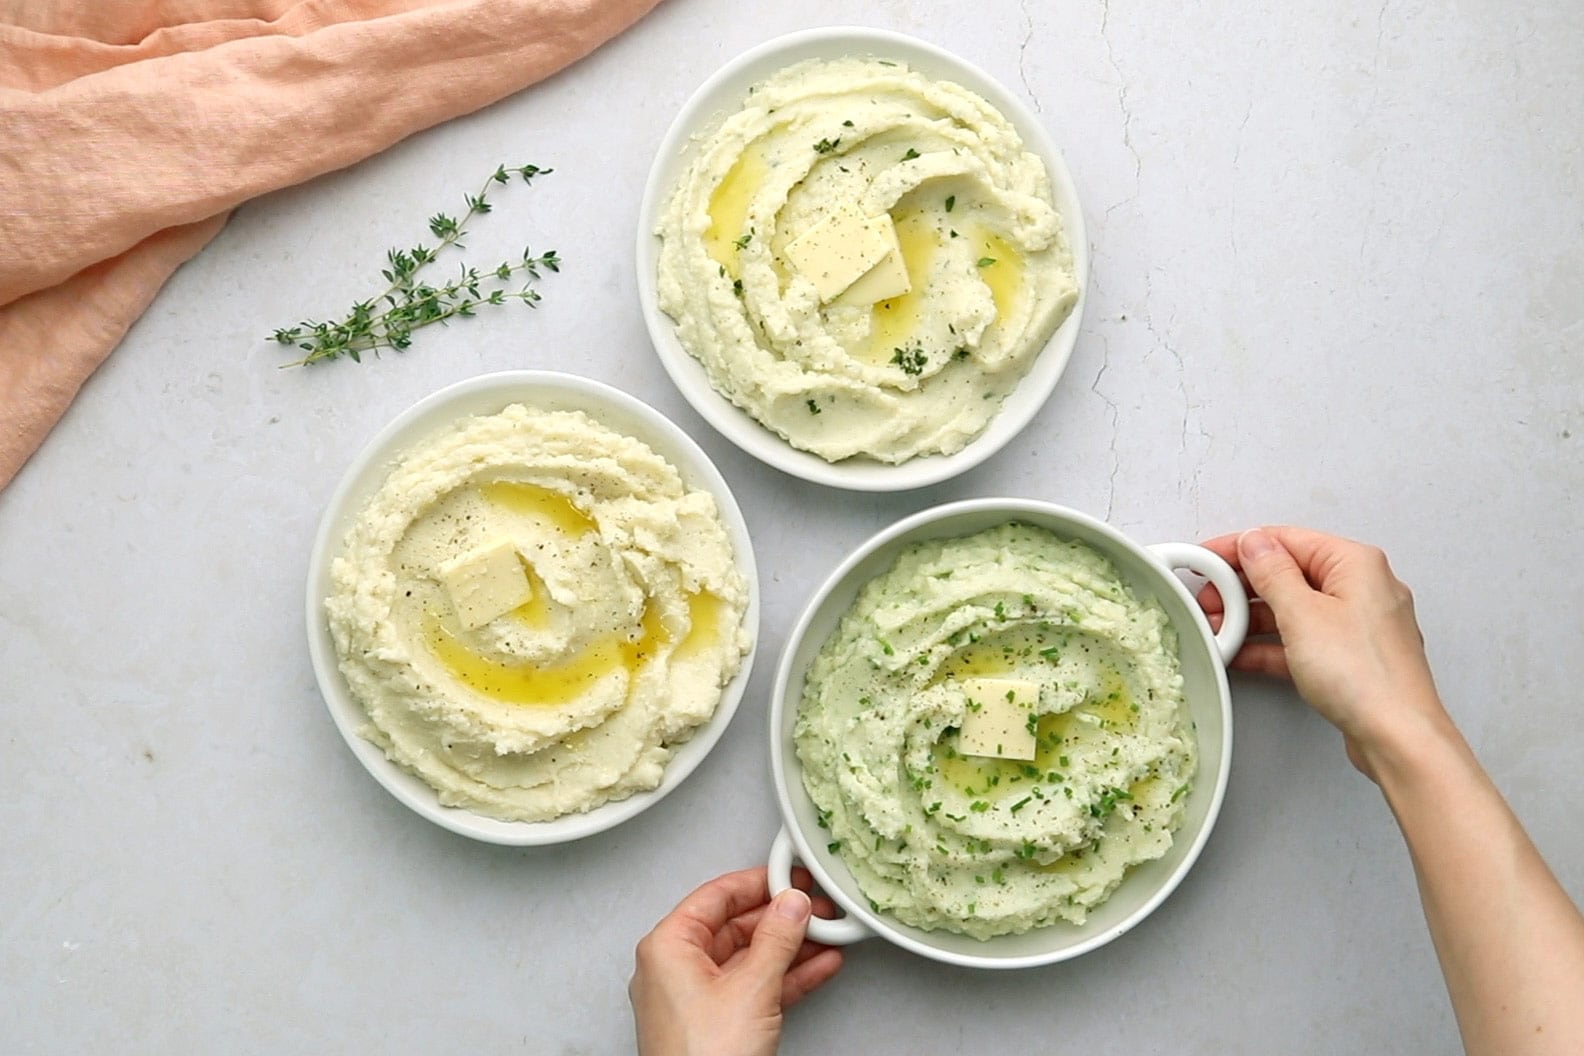 Two hands placing a third plate of mashed cauliflower next to two plates with different flavours.